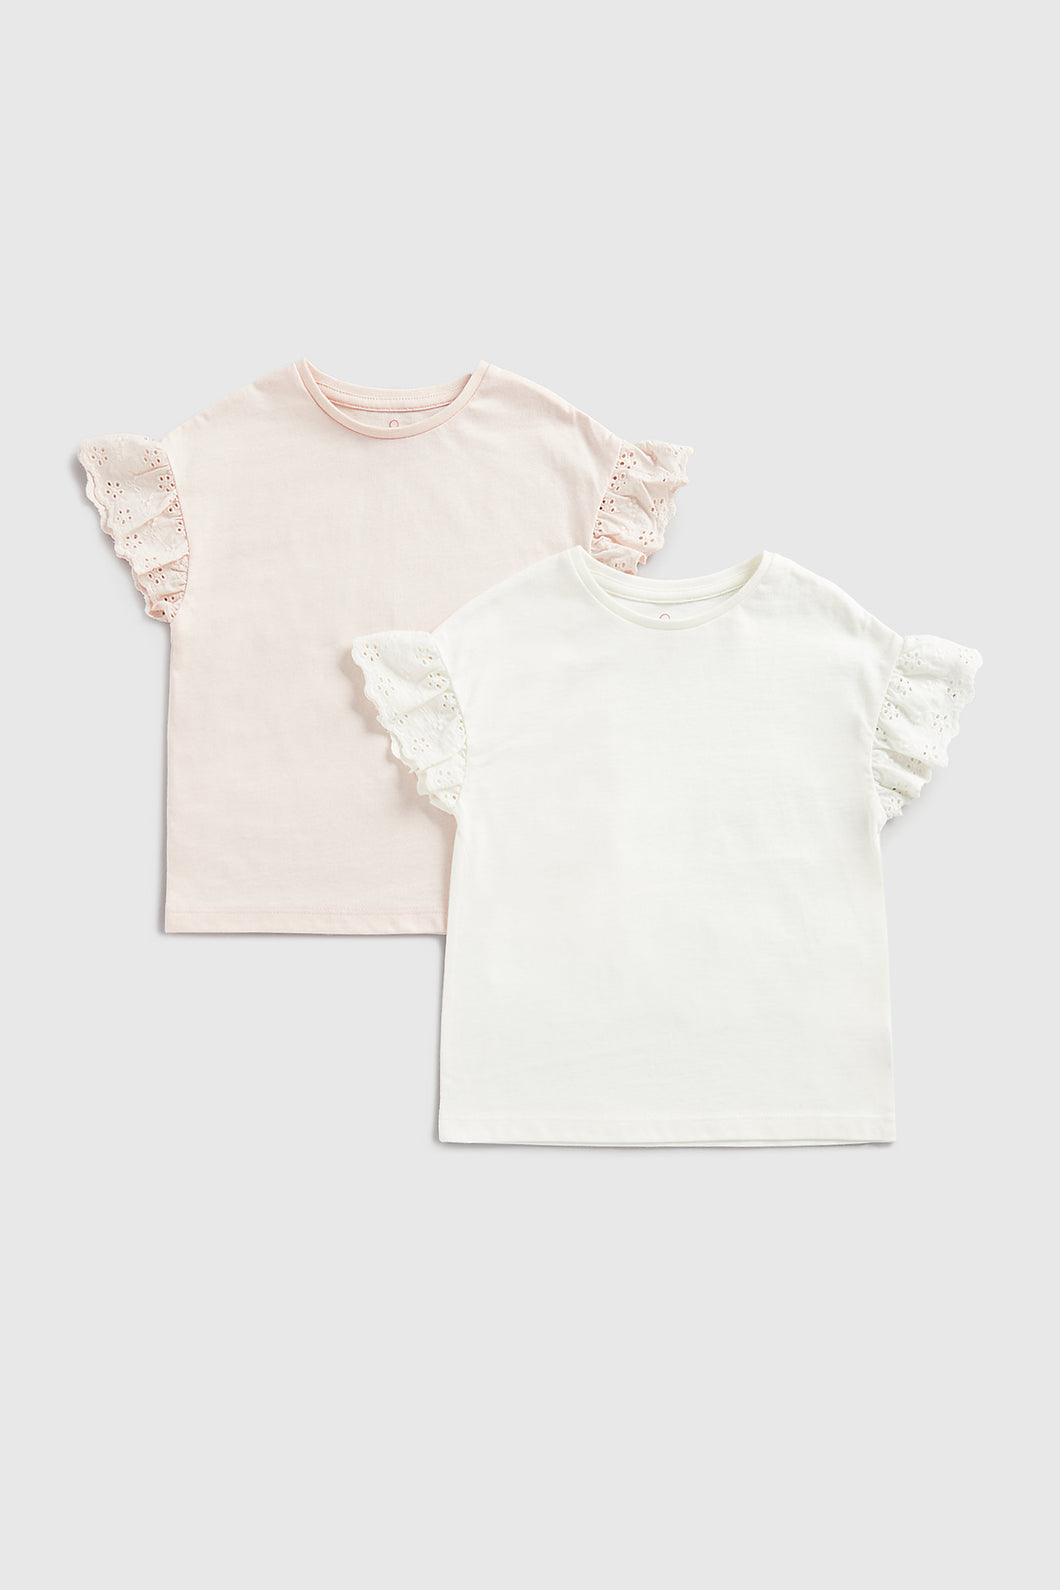 Mothercare Broderie-Sleeve T-Shirts - 2 Pack